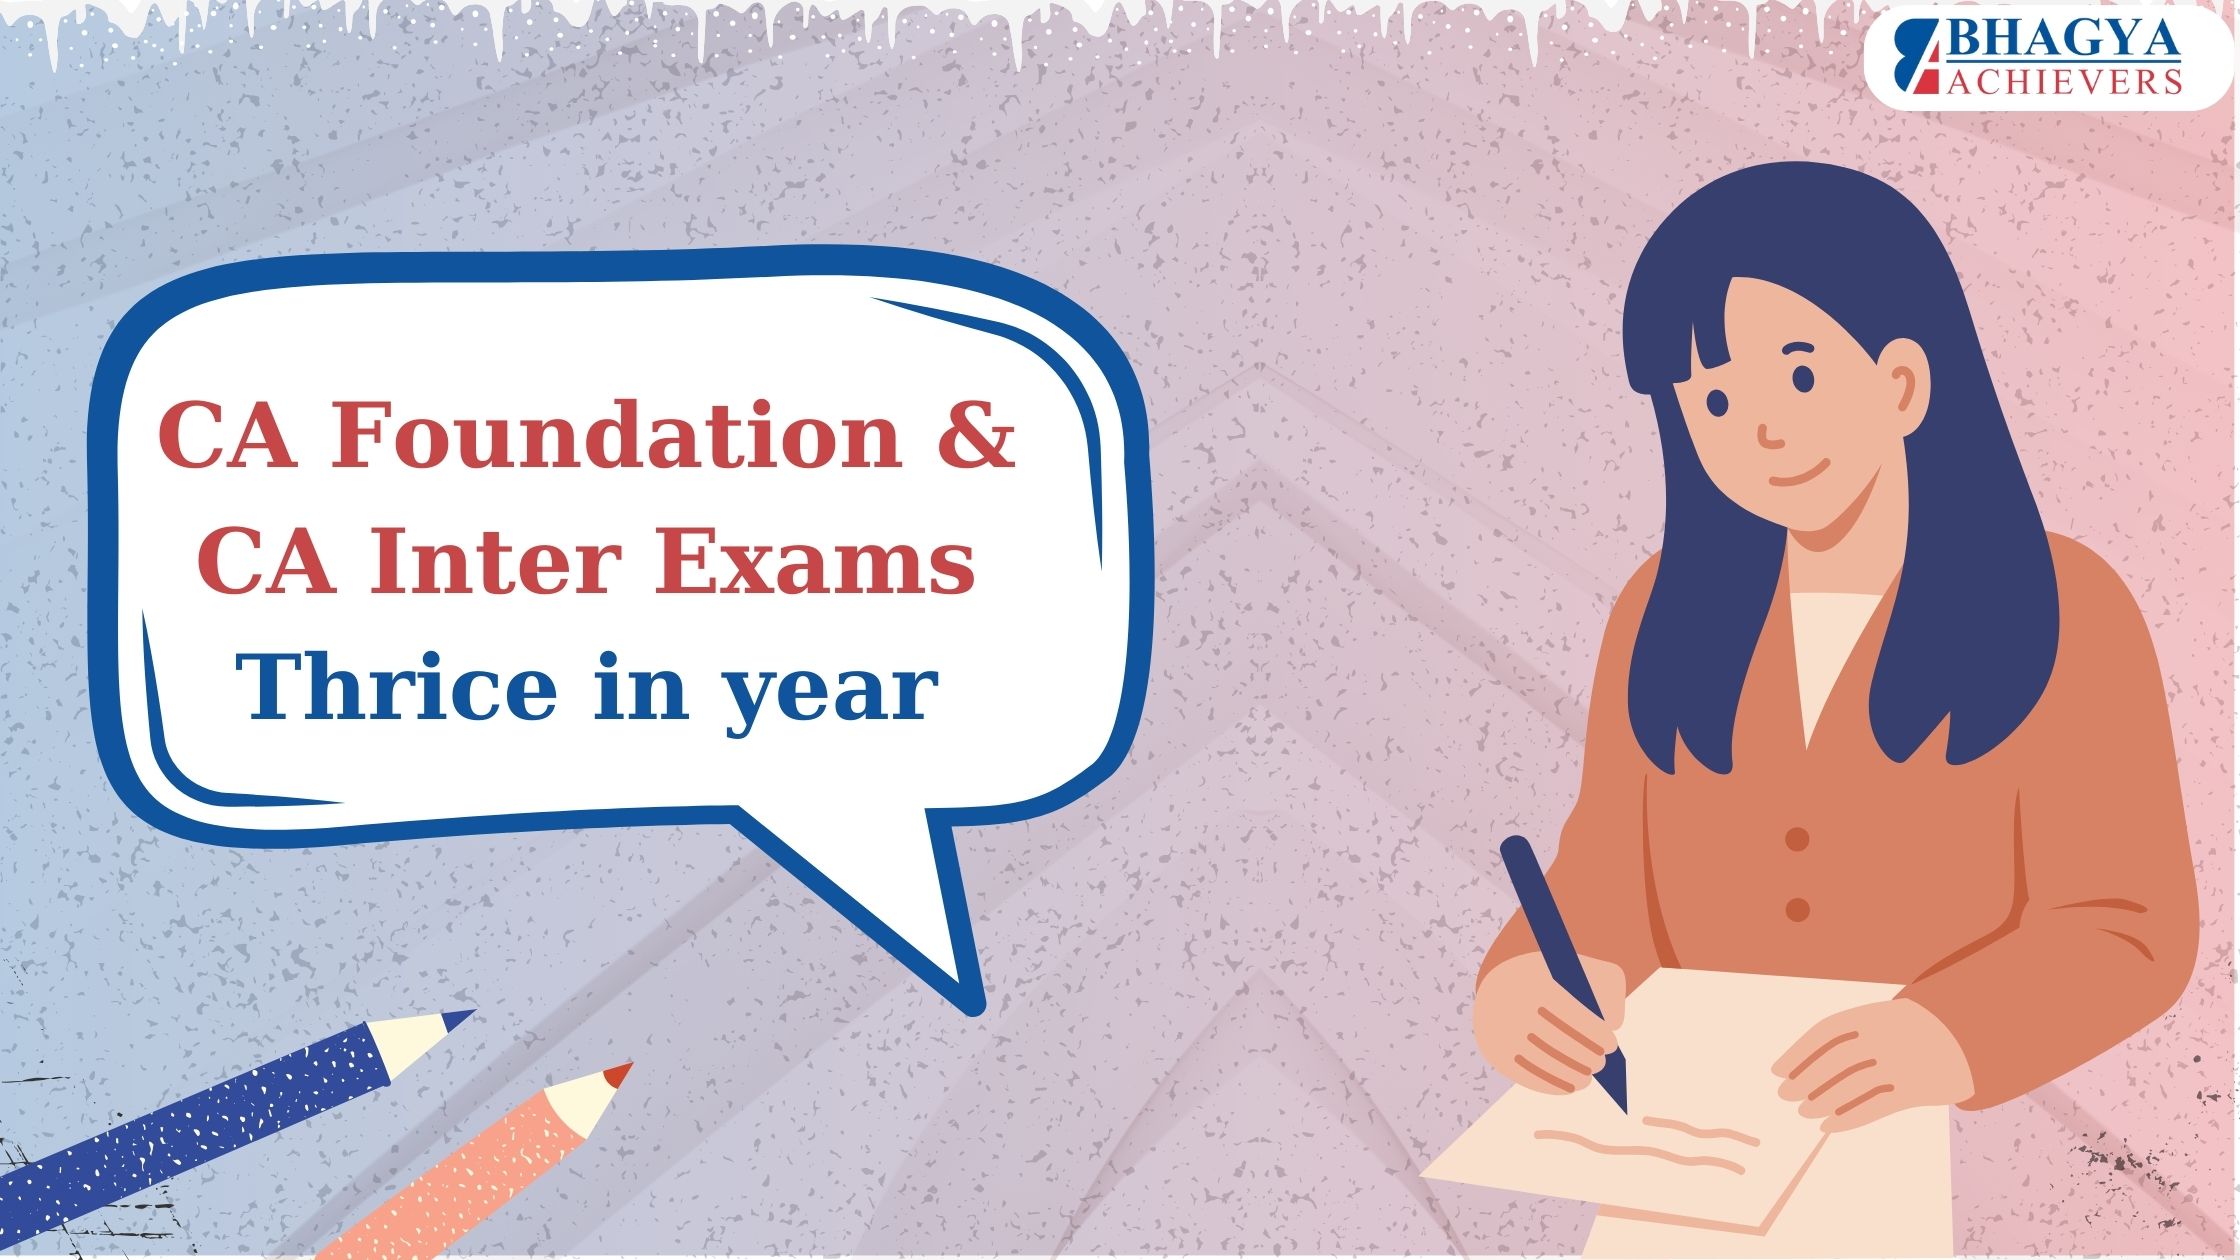 CA Foundation and CA Inter Exams to be held three times a year - Bhagya Achievers